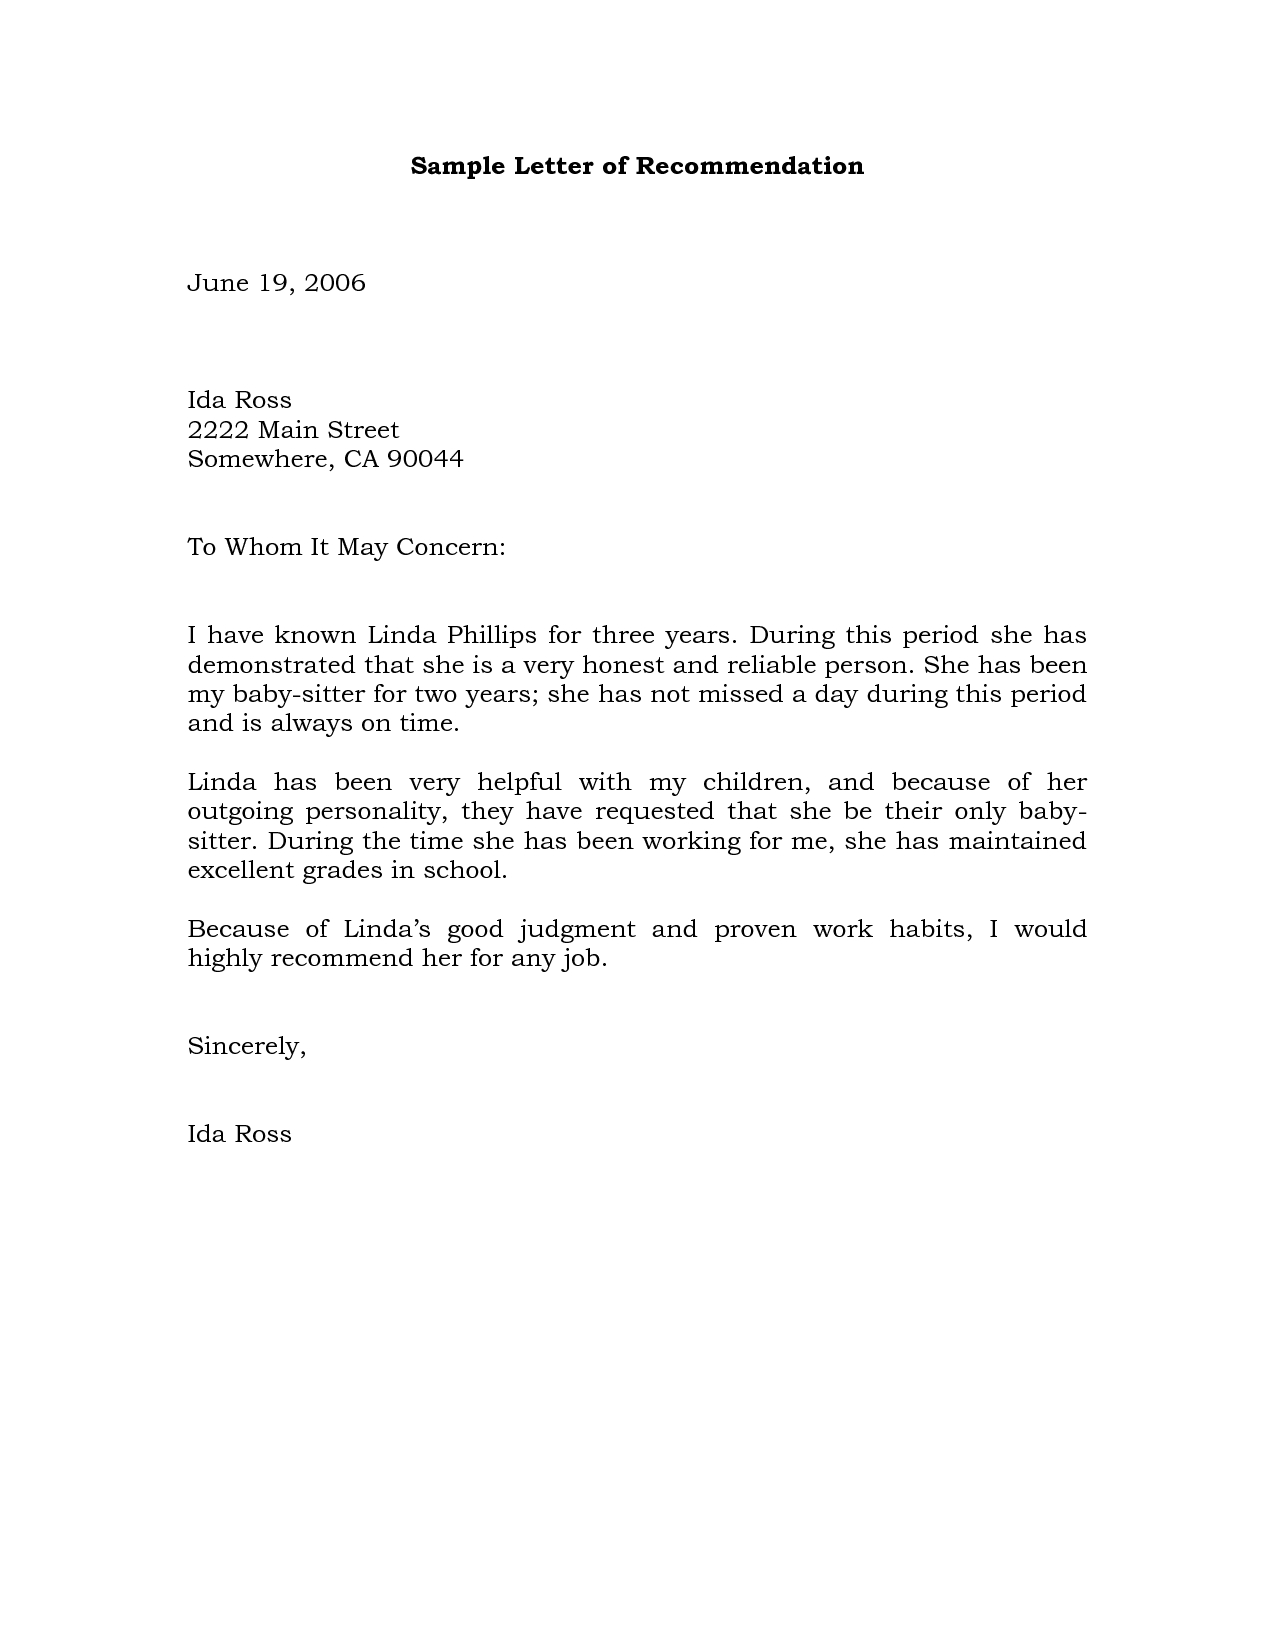 Simple Letter Of Recommendation Template Debandje inside dimensions 1275 X 1650